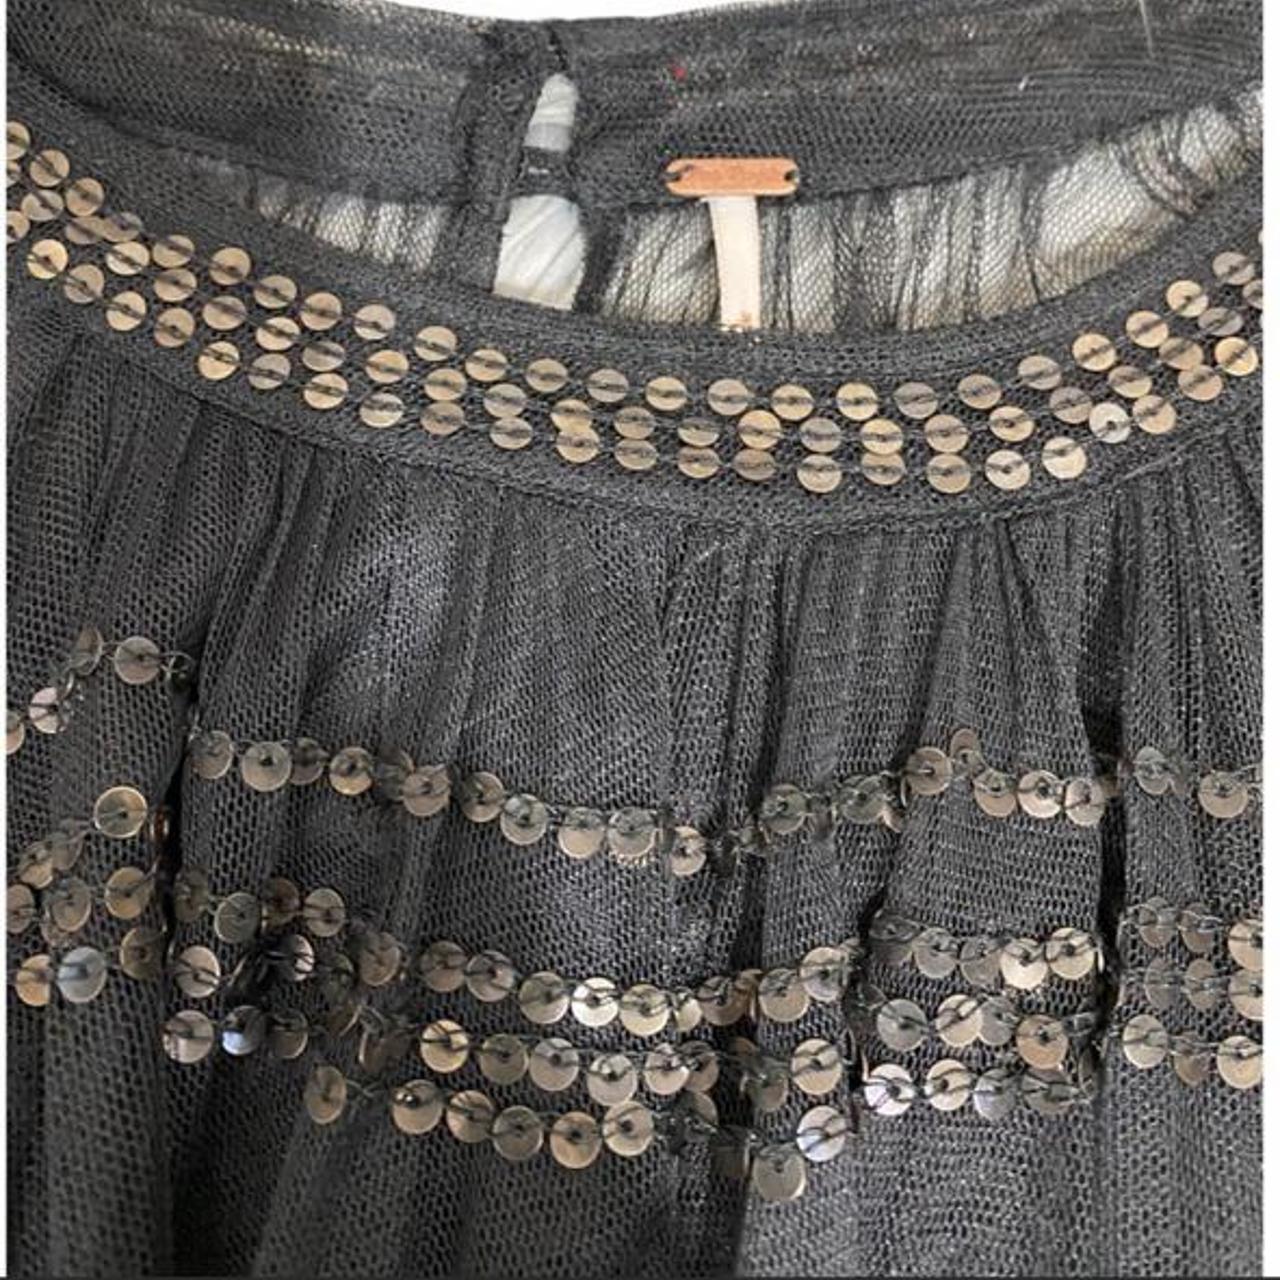 Product Image 4 - Perfect condition Free People Top
See